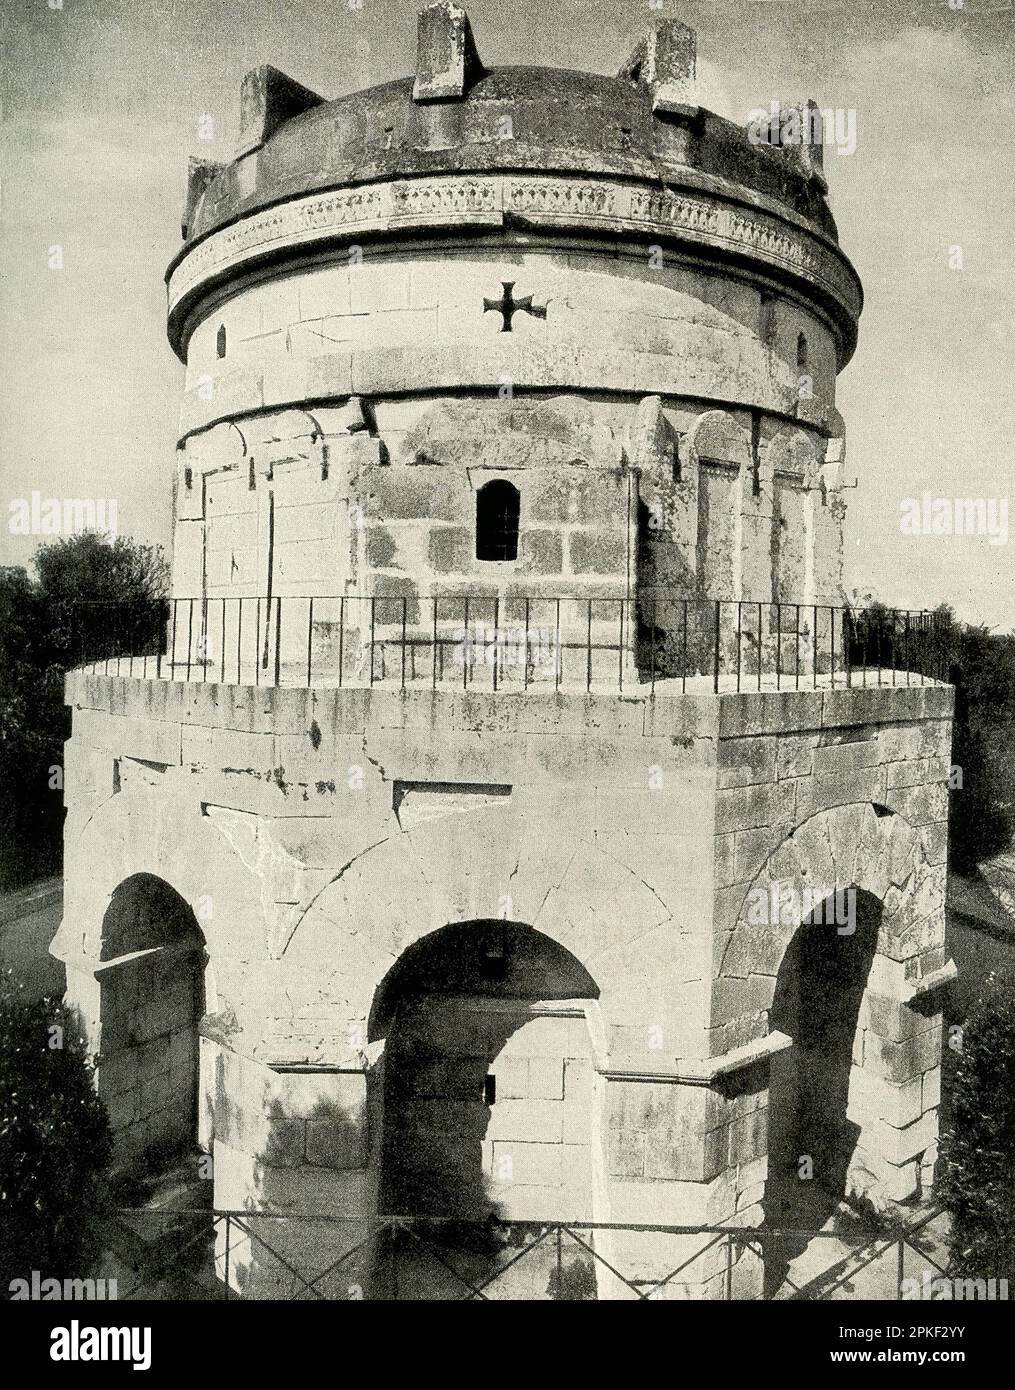 This 1909 image shows the tomb of Theodorich of Ravenna. The Mausoleum of Theodoric is an ancient monument just outside Ravenna, Italy. It was built in 520 AD by Theodoric the Great, king of the Ostrogoths, as his future tomb. Theodoric, at the encouragement and direction of the Roman emperor Zeno, invaded Italy, deposed King Odoacer, and ruled over a kingdom of Romans and Goths from 493-526 AD Stock Photo